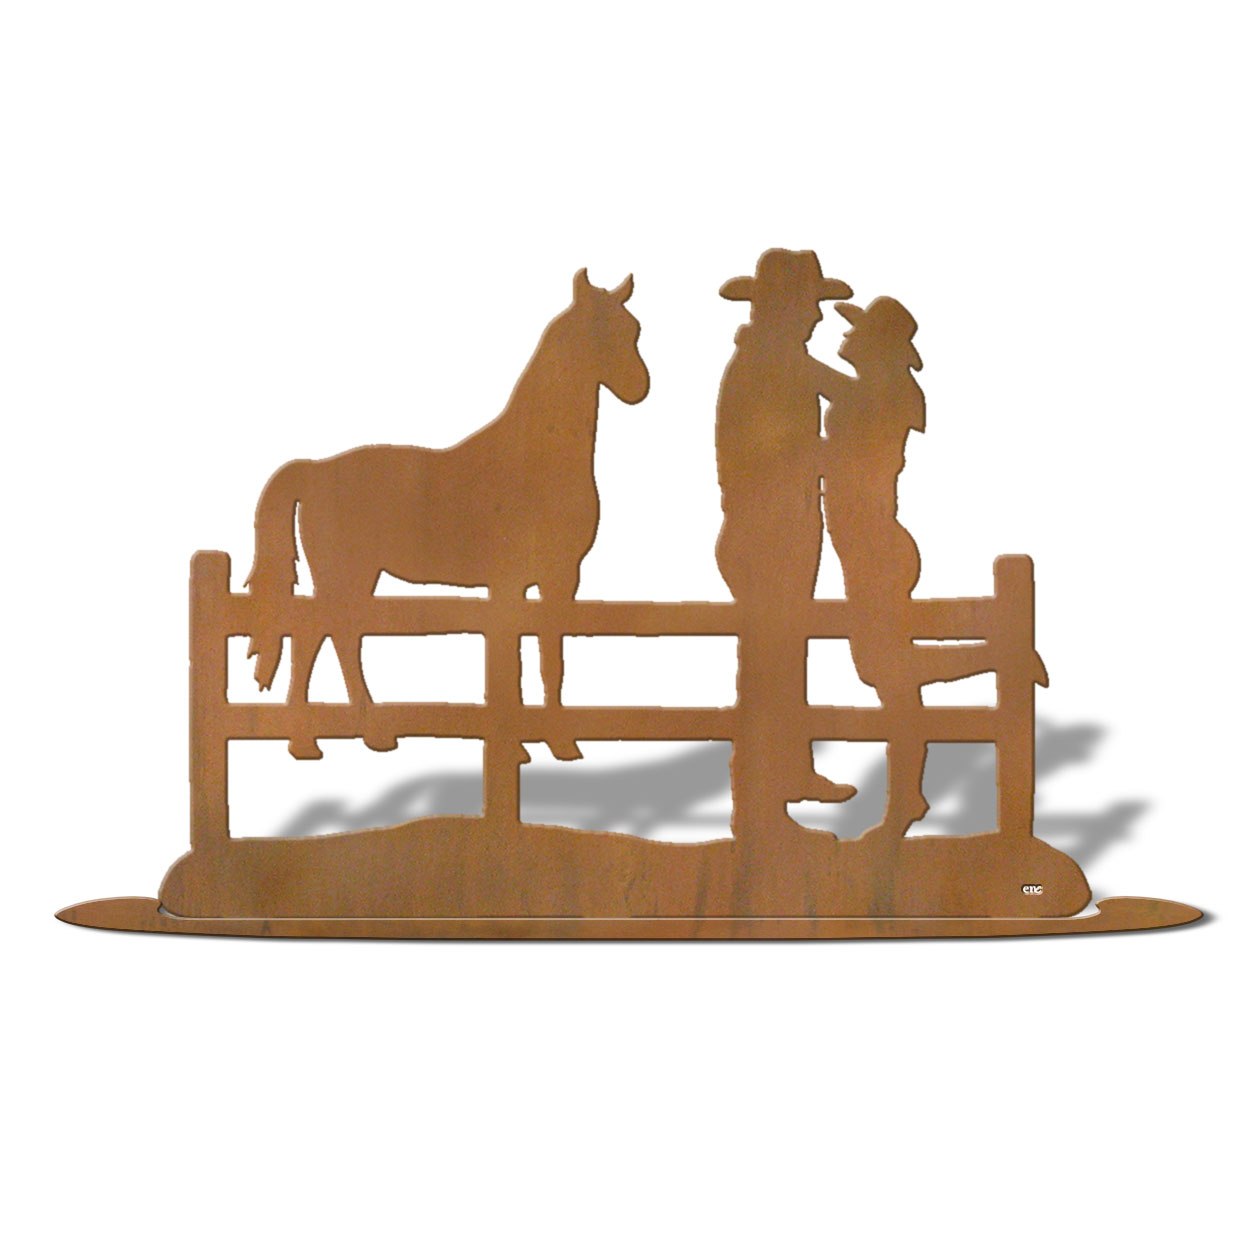 623010r - Tabletop Art - 19in x 14in - Cowboy Lovers - Rust Patina